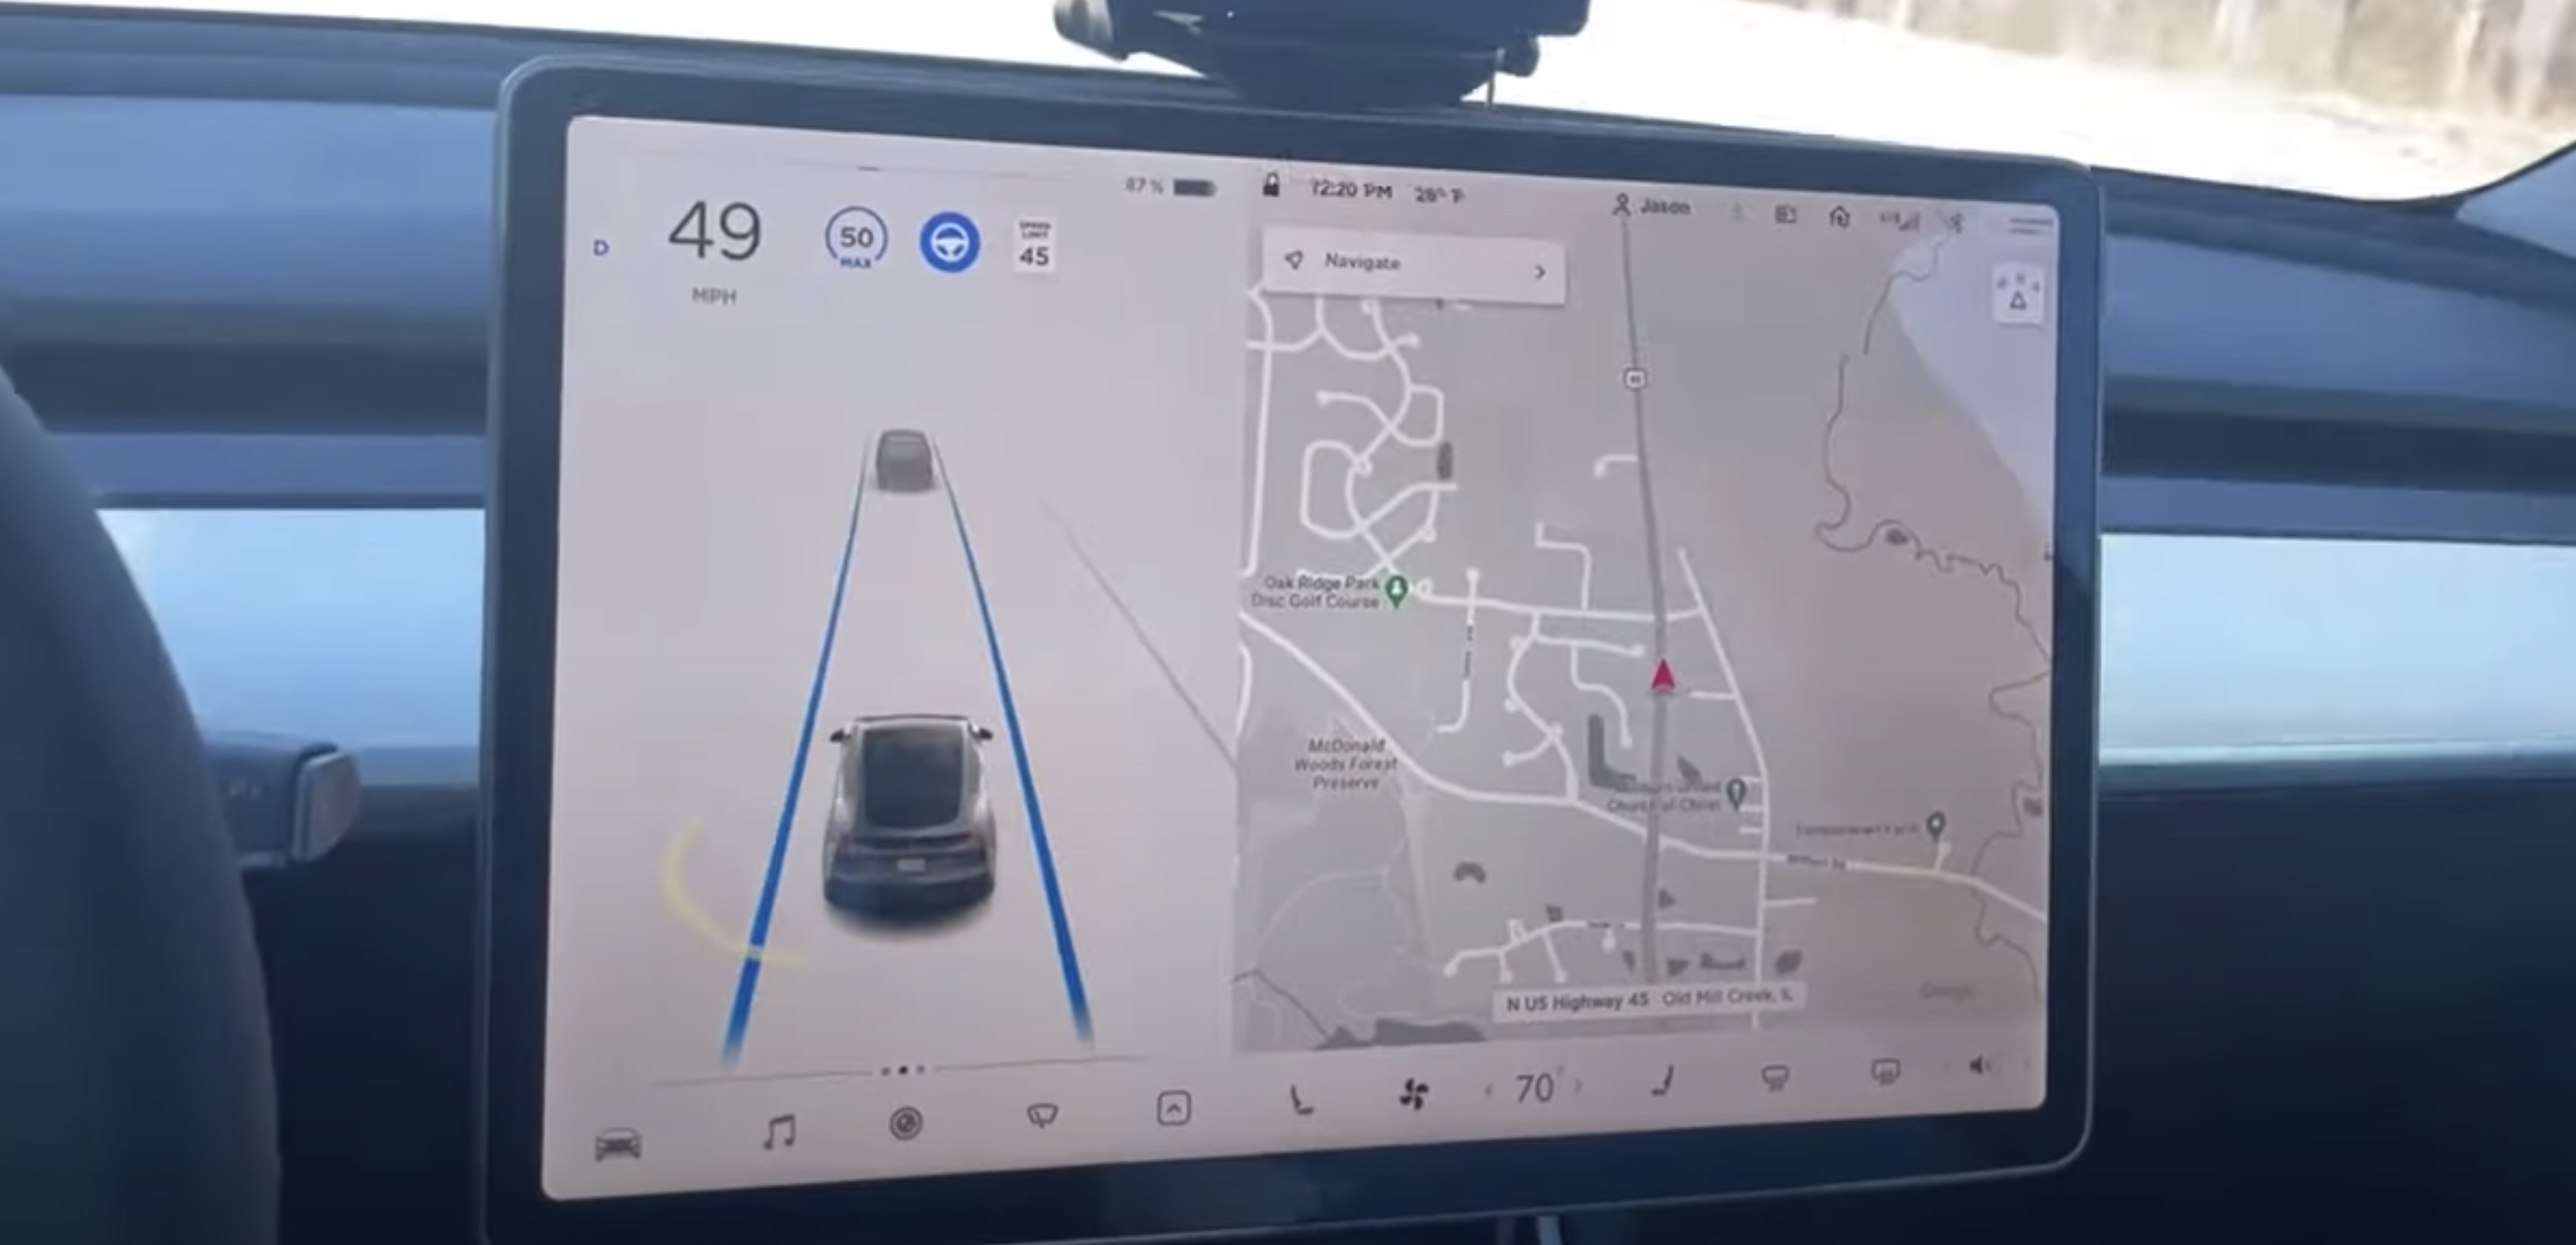 Tesla releases software update that turns your car into a boombox, and